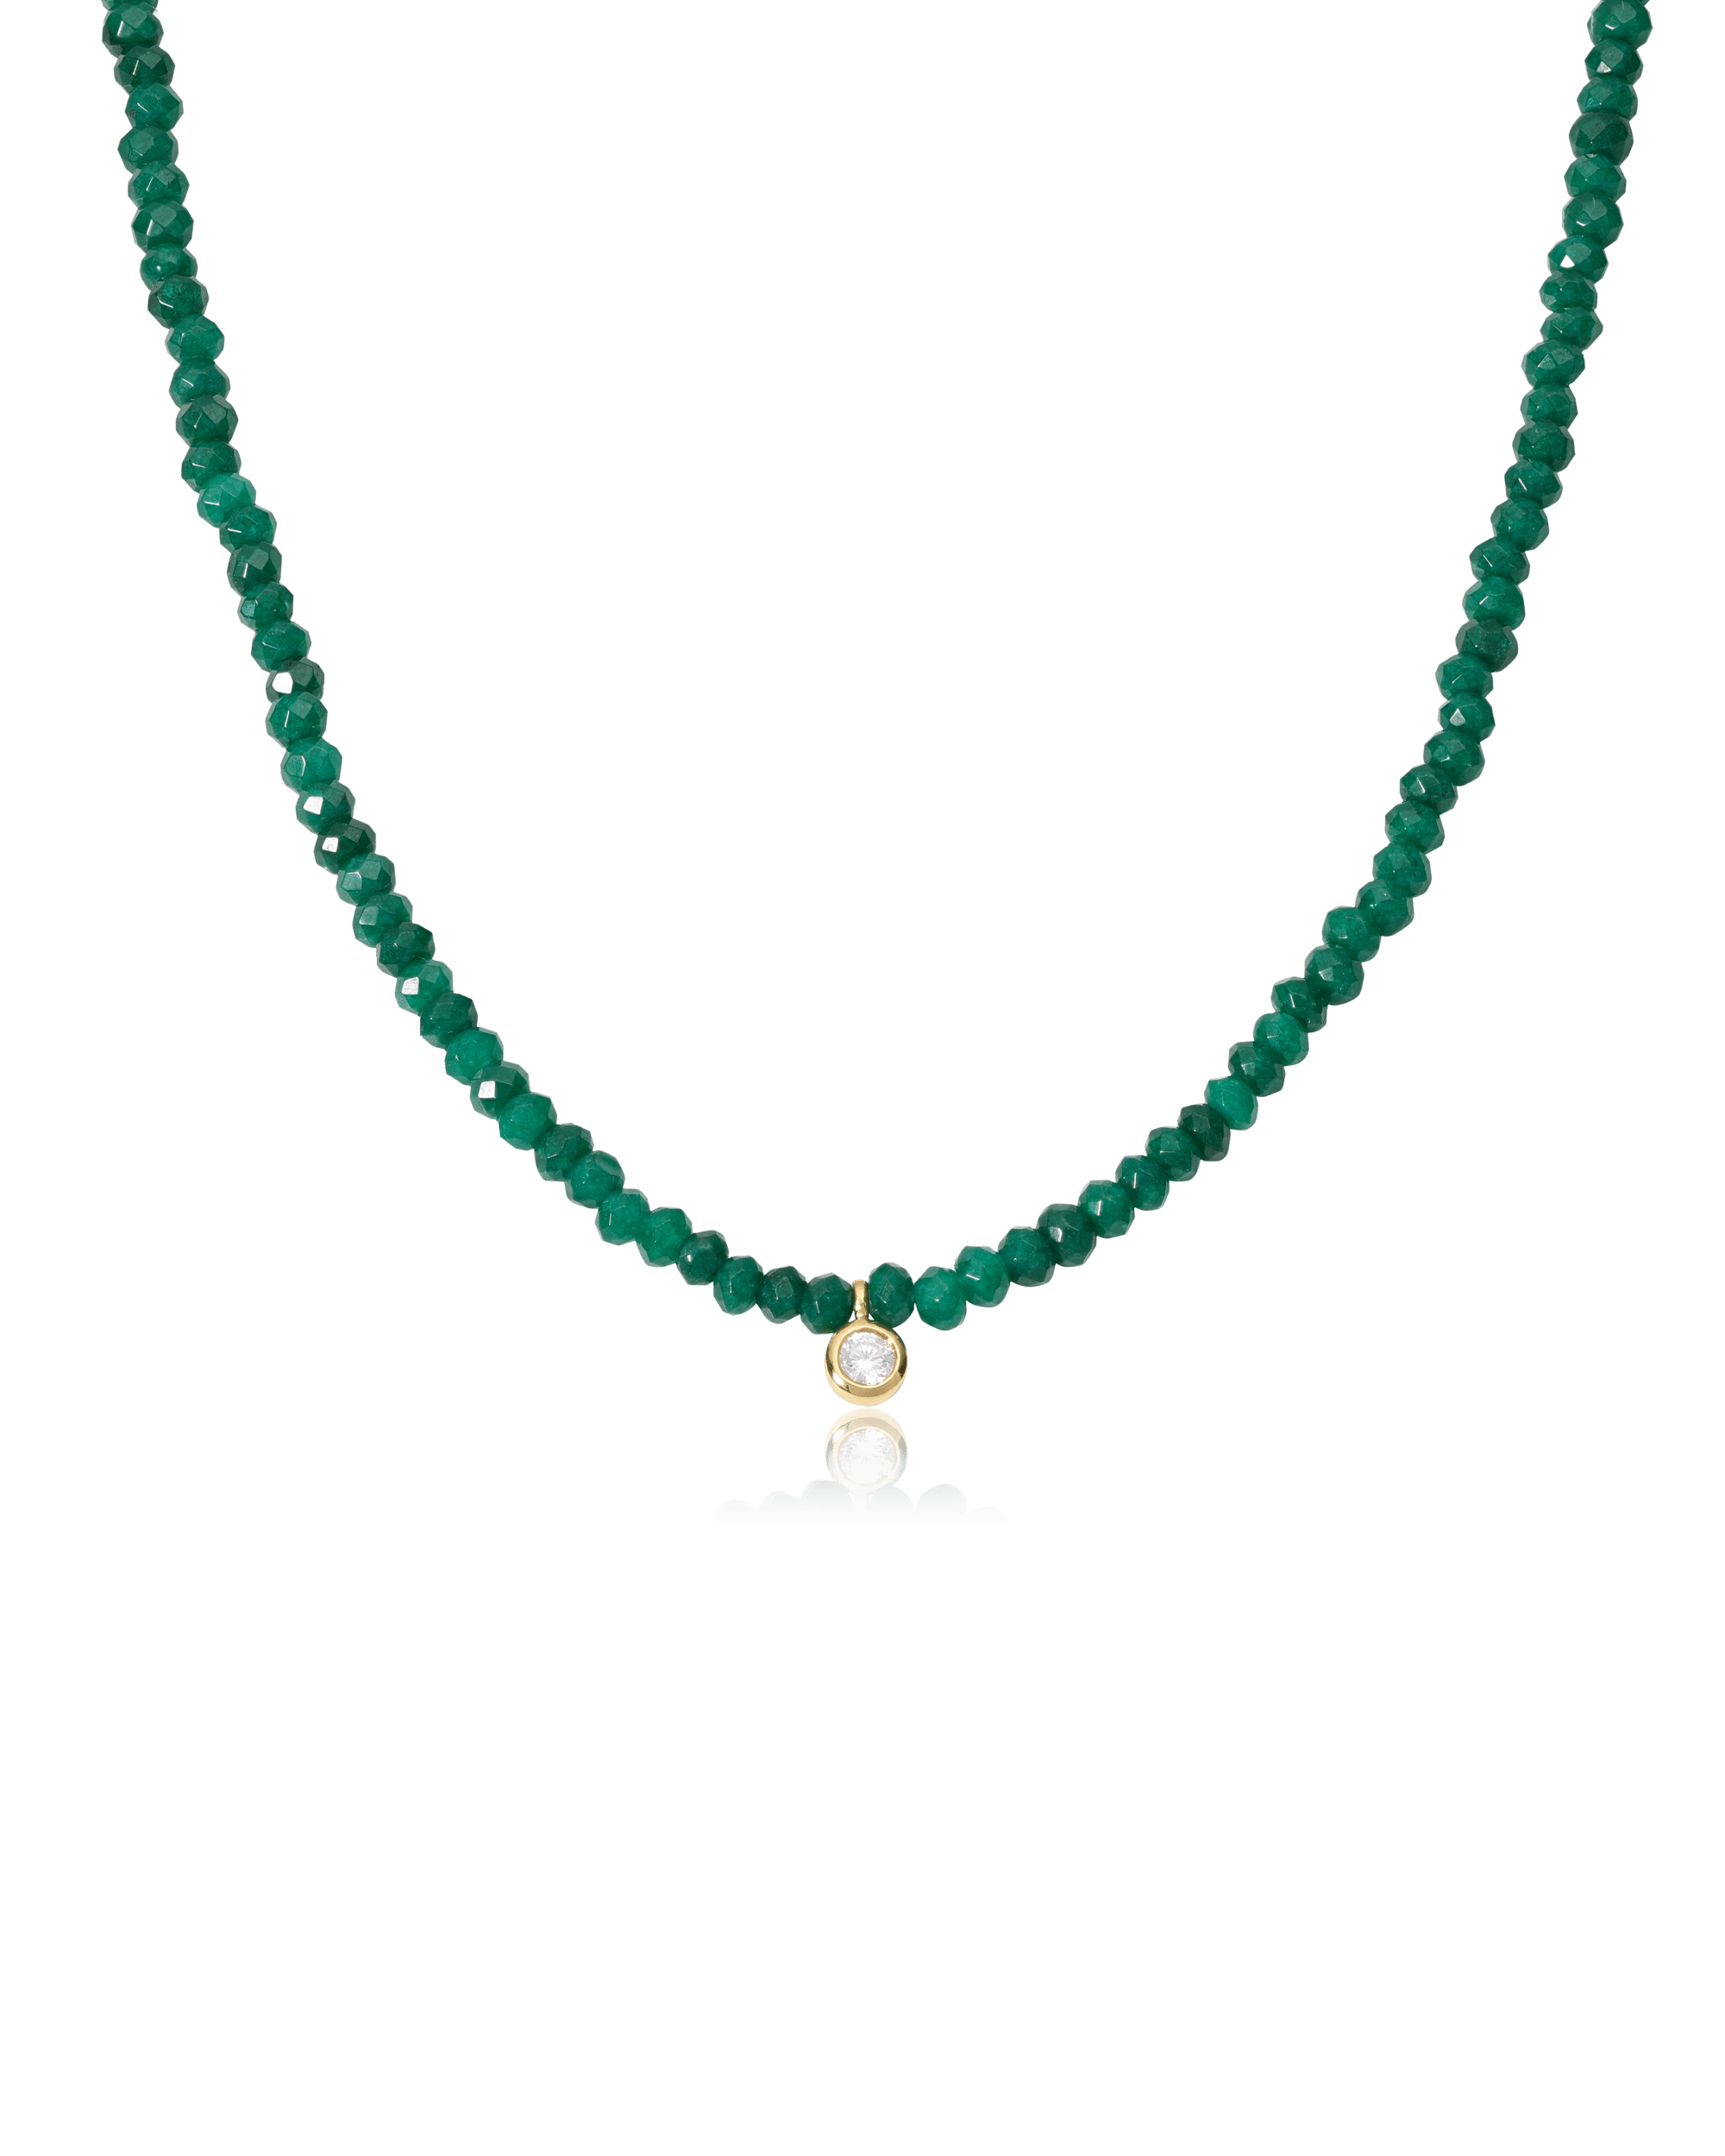 Green Jade and Diamond Necklace - 14K Yellow Gold Necklaces magal-dev Green Jade Gemstones Small: 0.03ct 16"